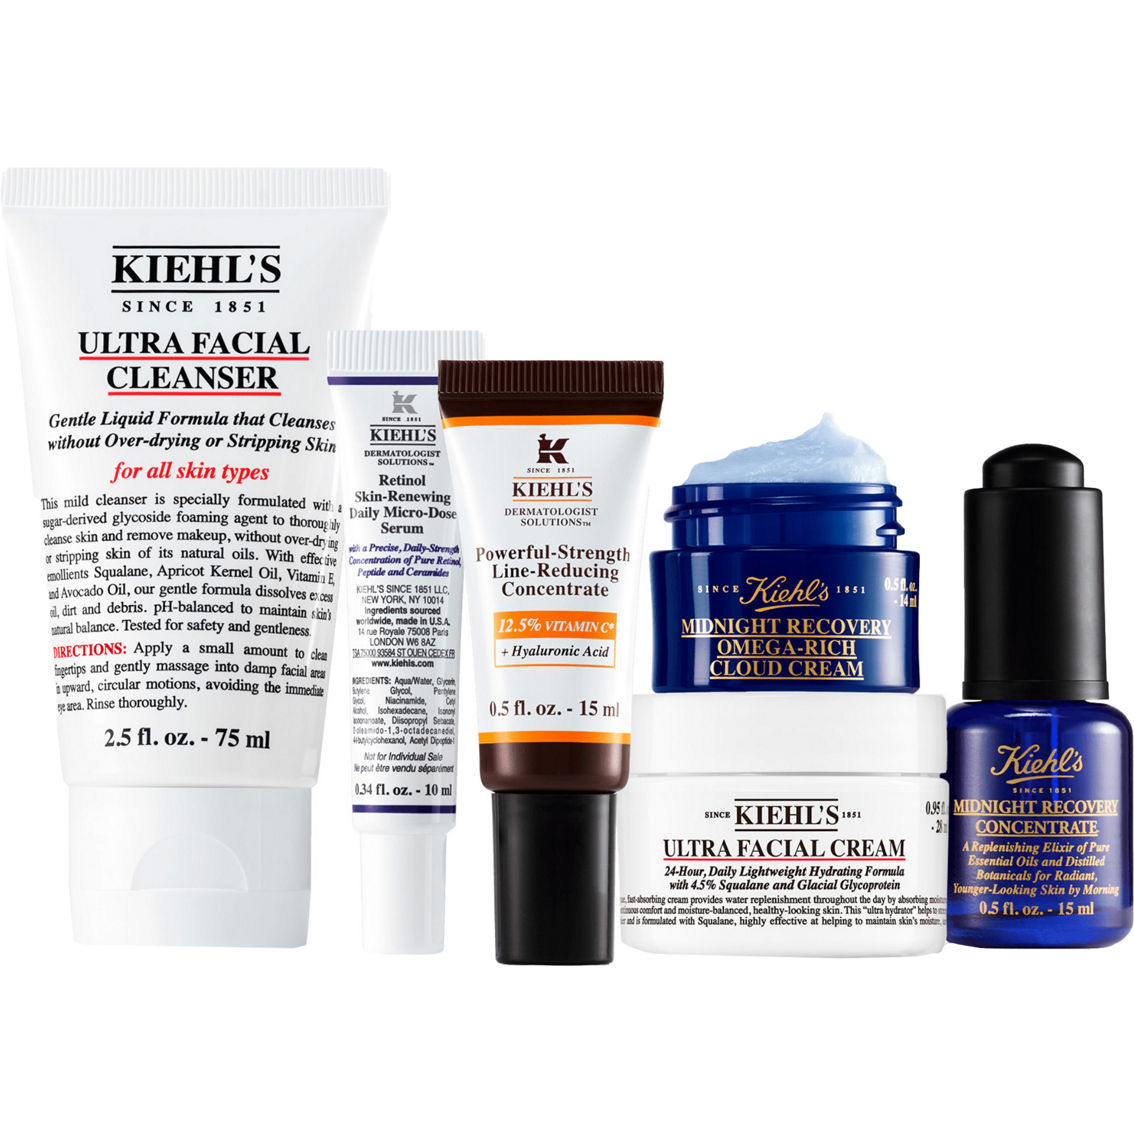 Kiehl's Mom's Daily Essentials 6 pc. Gift Set - Image 2 of 3